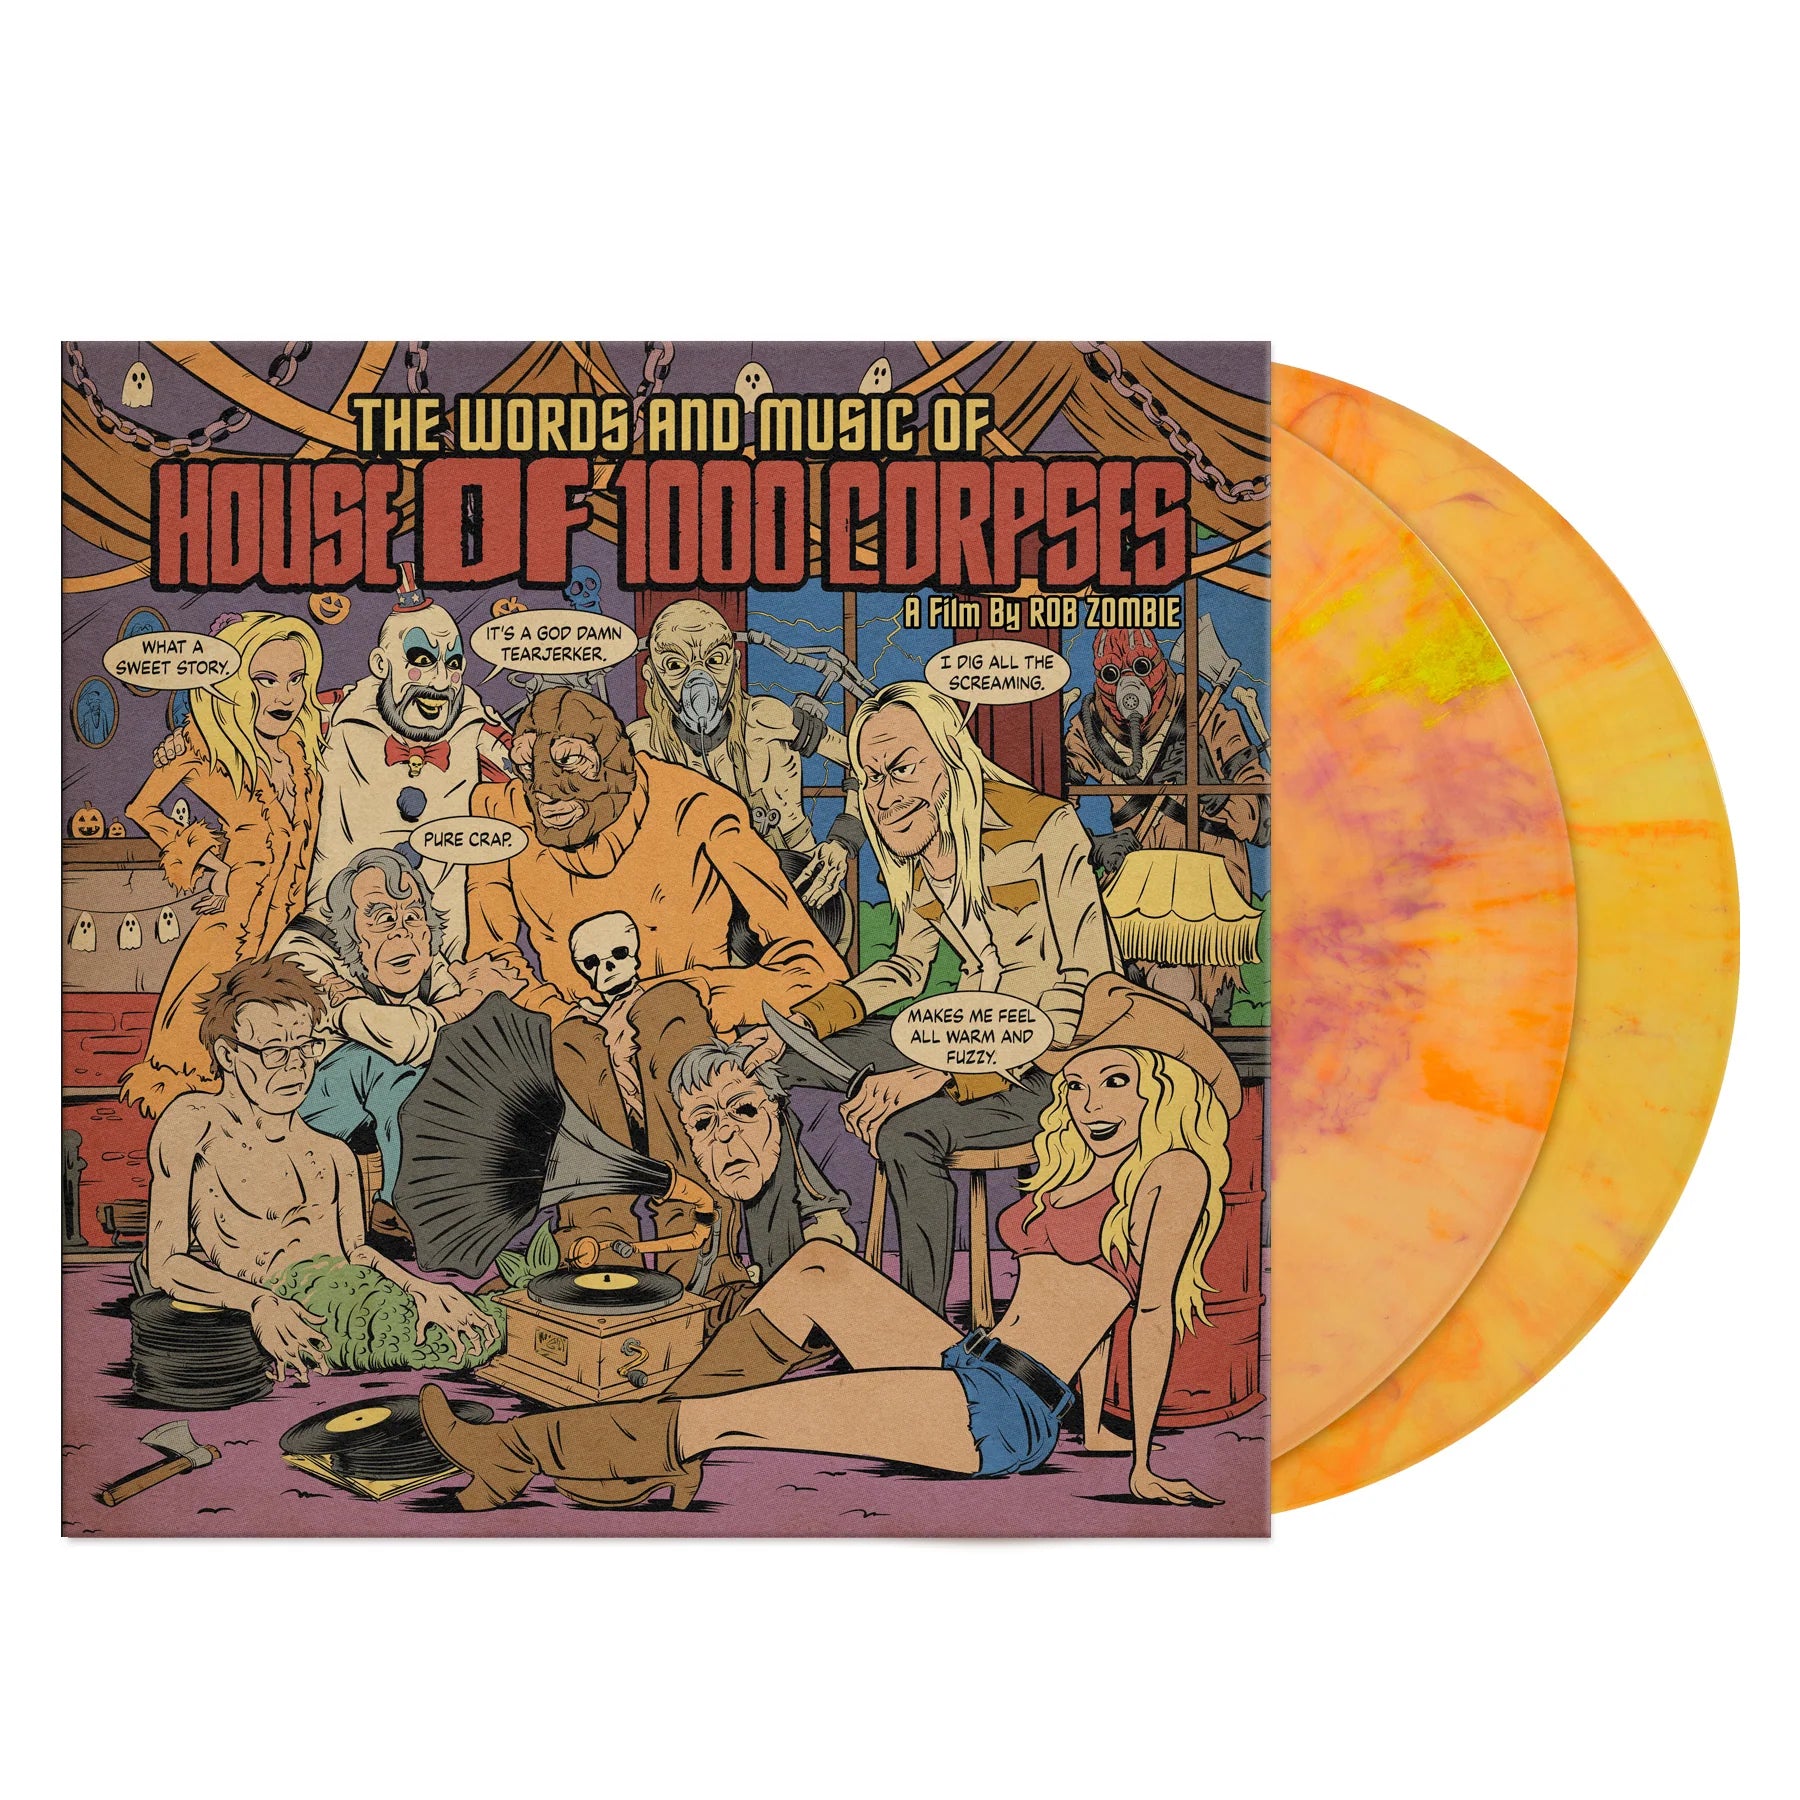 Rob Zombie - The Words & Music of House of 1000 Corpses: Limited 'Halloween Party' Coloured Vinyl 2LP